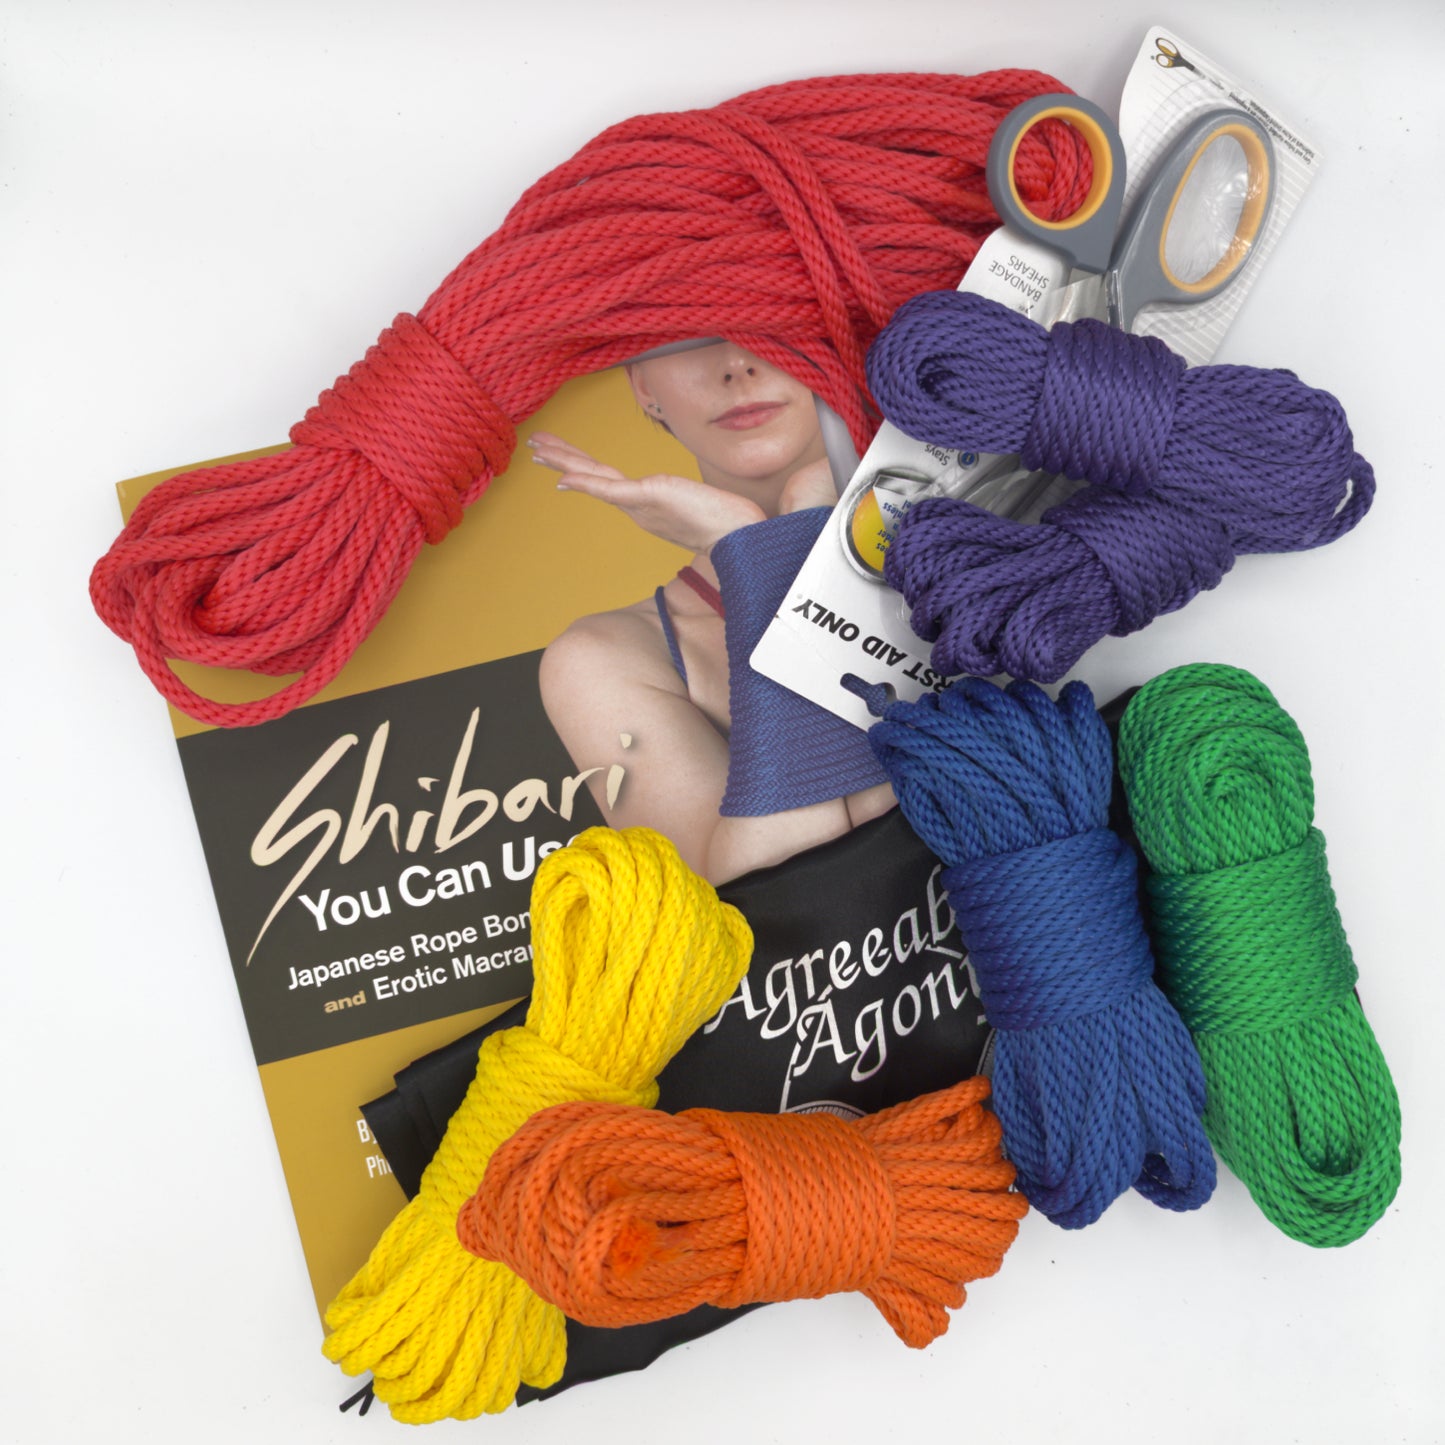 Awesome RAINBOW Rope Bondage Beginners MFP Kit - Rope, Book, Shears and Bag! - 7 Bundles of Synthetic Rope- 200ft